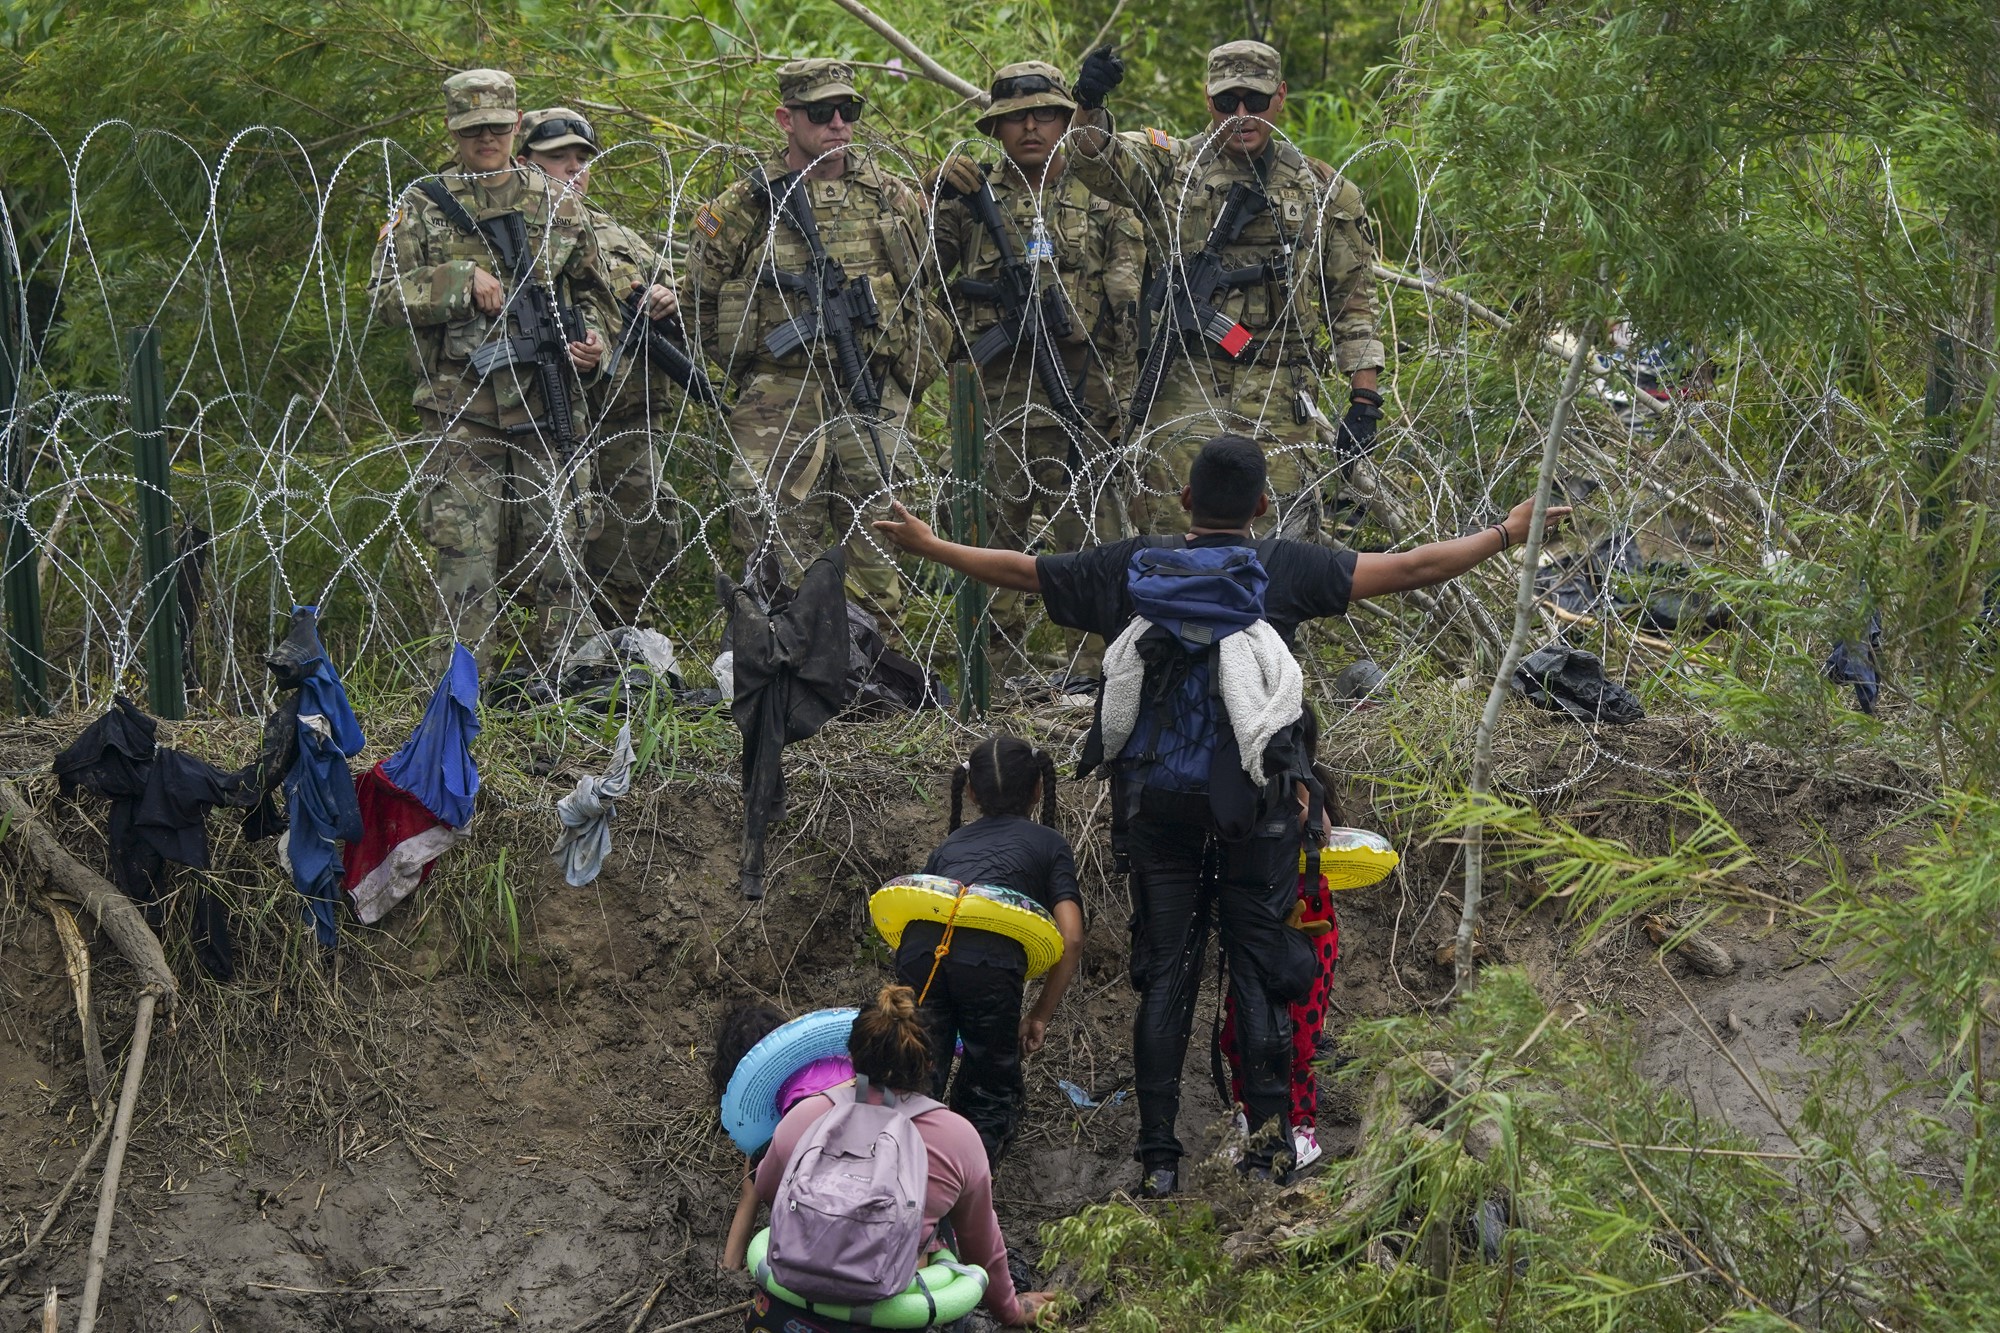 A migrant gestures to Texas National Guards standing behind razor wire on the bank of the Rio Grande river.